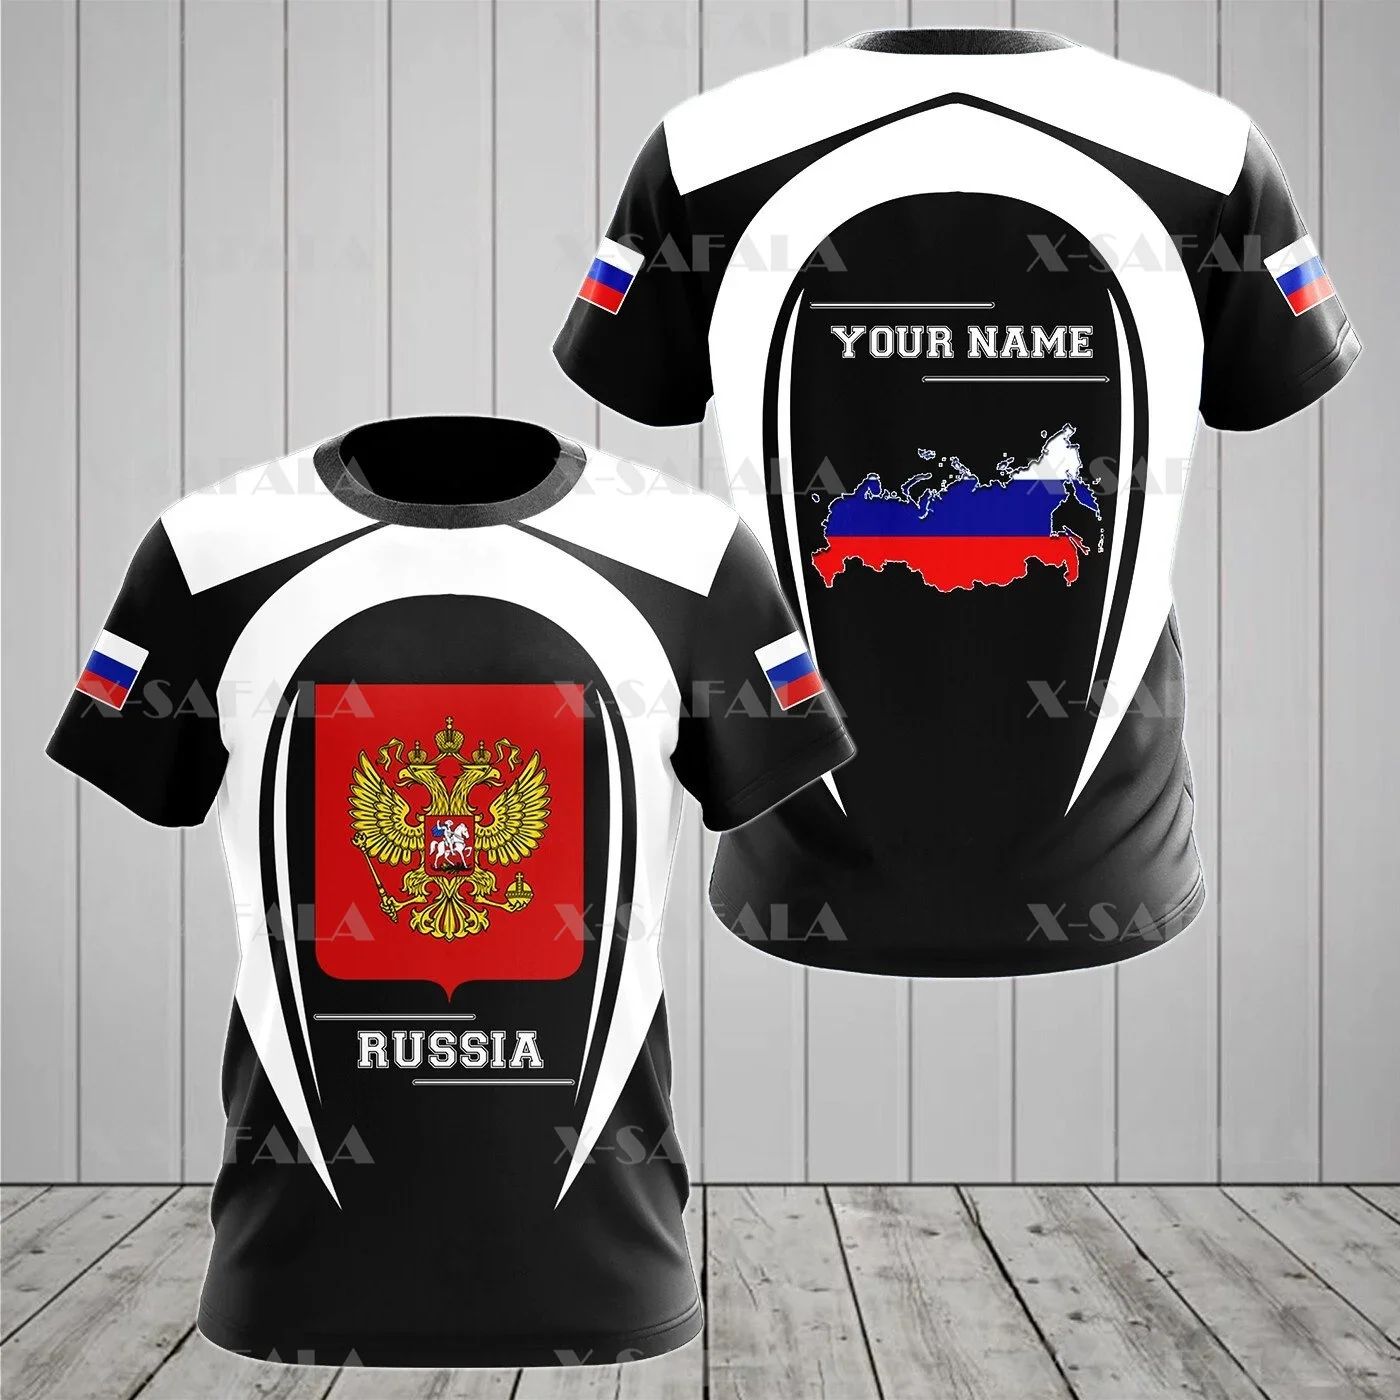 

RUSSIA Skull CAMO Soldier-ARMY-VETERAN Country Flag 3D Printed High Quality T-shirt Summer Round Neck Men Female Casual Top-6